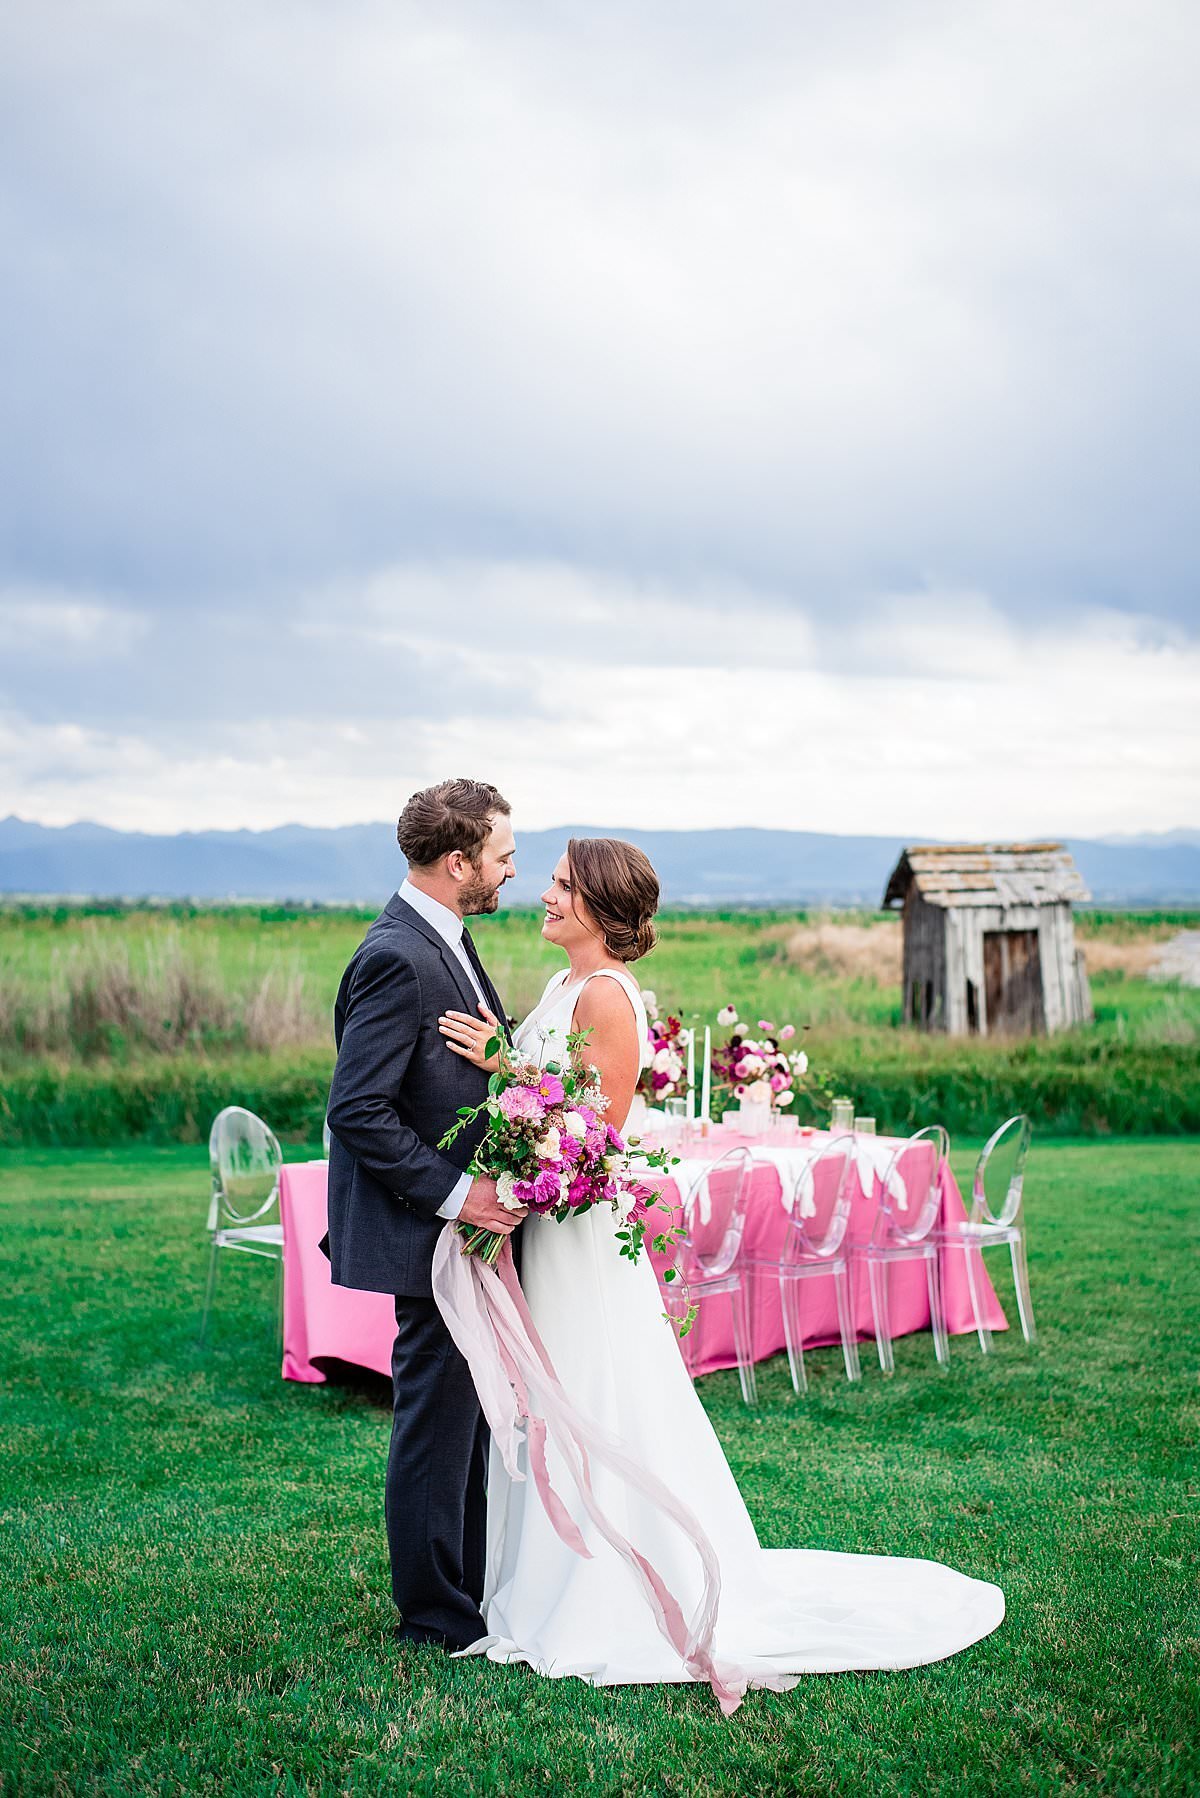 Bride and groom standing near outdoor reception table featuring hot pink linen with Montana mountains in background